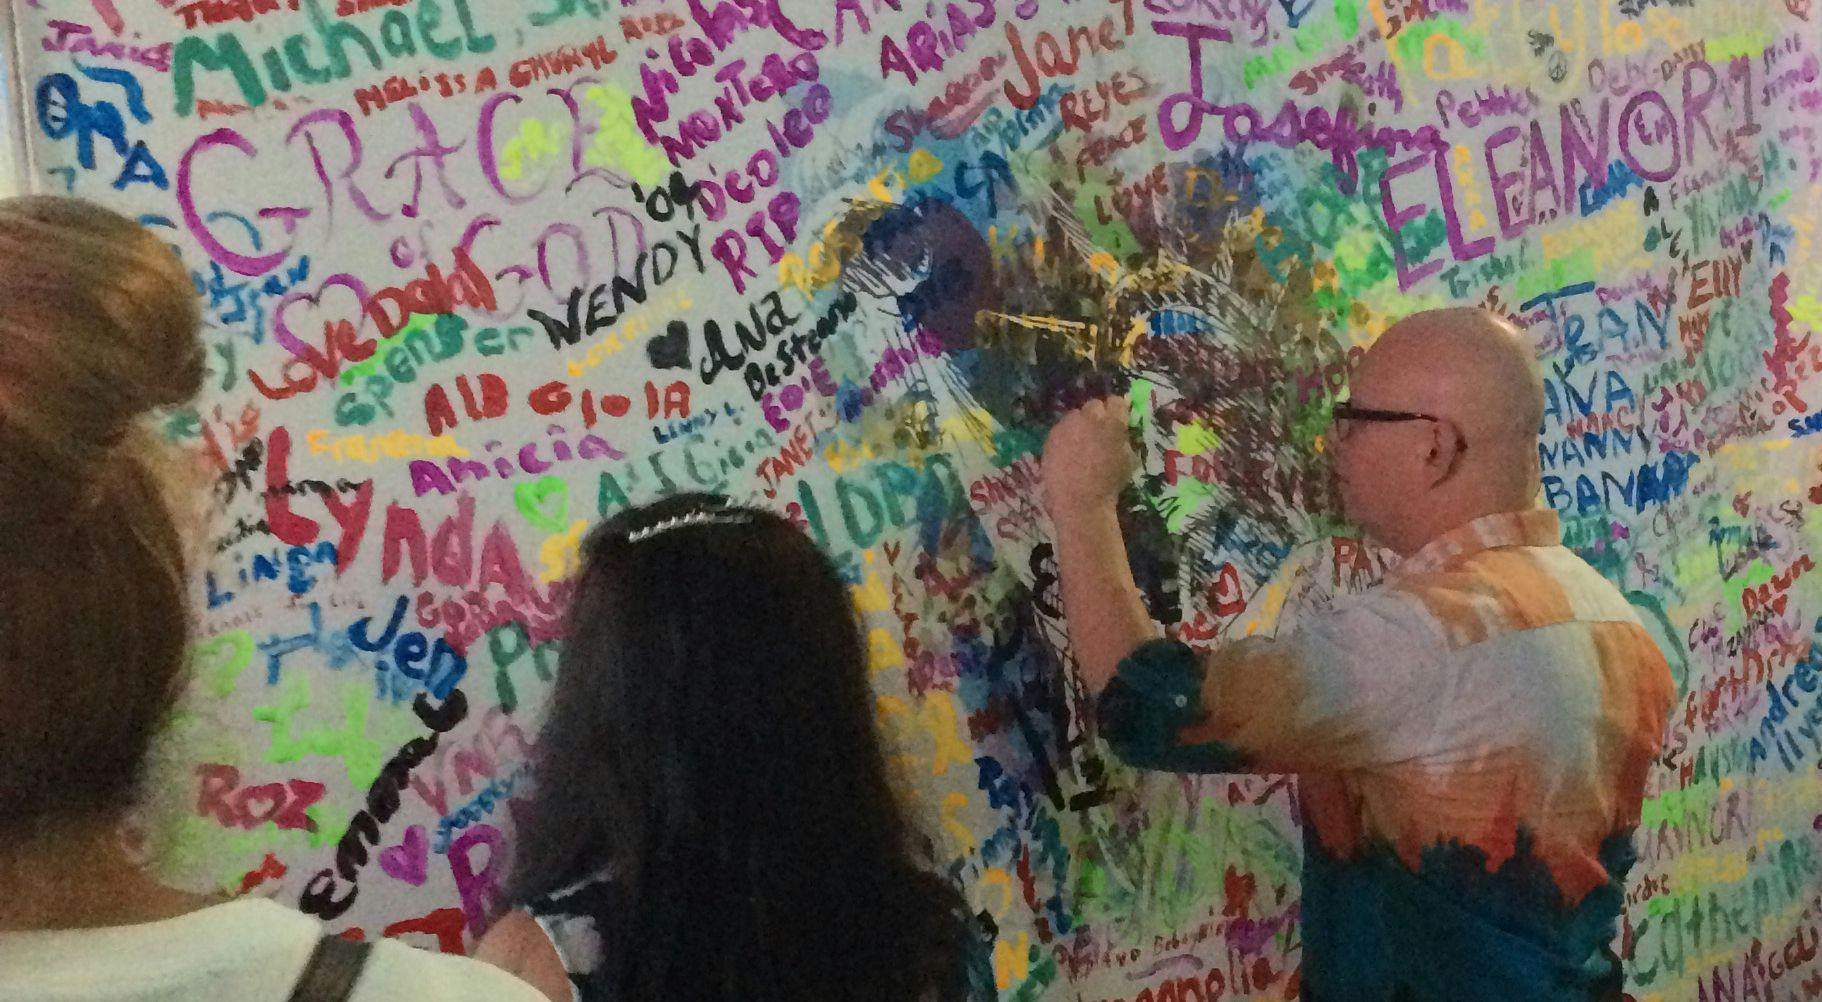 Attendees at the Life and Liberty event paint their names on a mural that will be displayed at John Theurer Cancer Center for the next year.